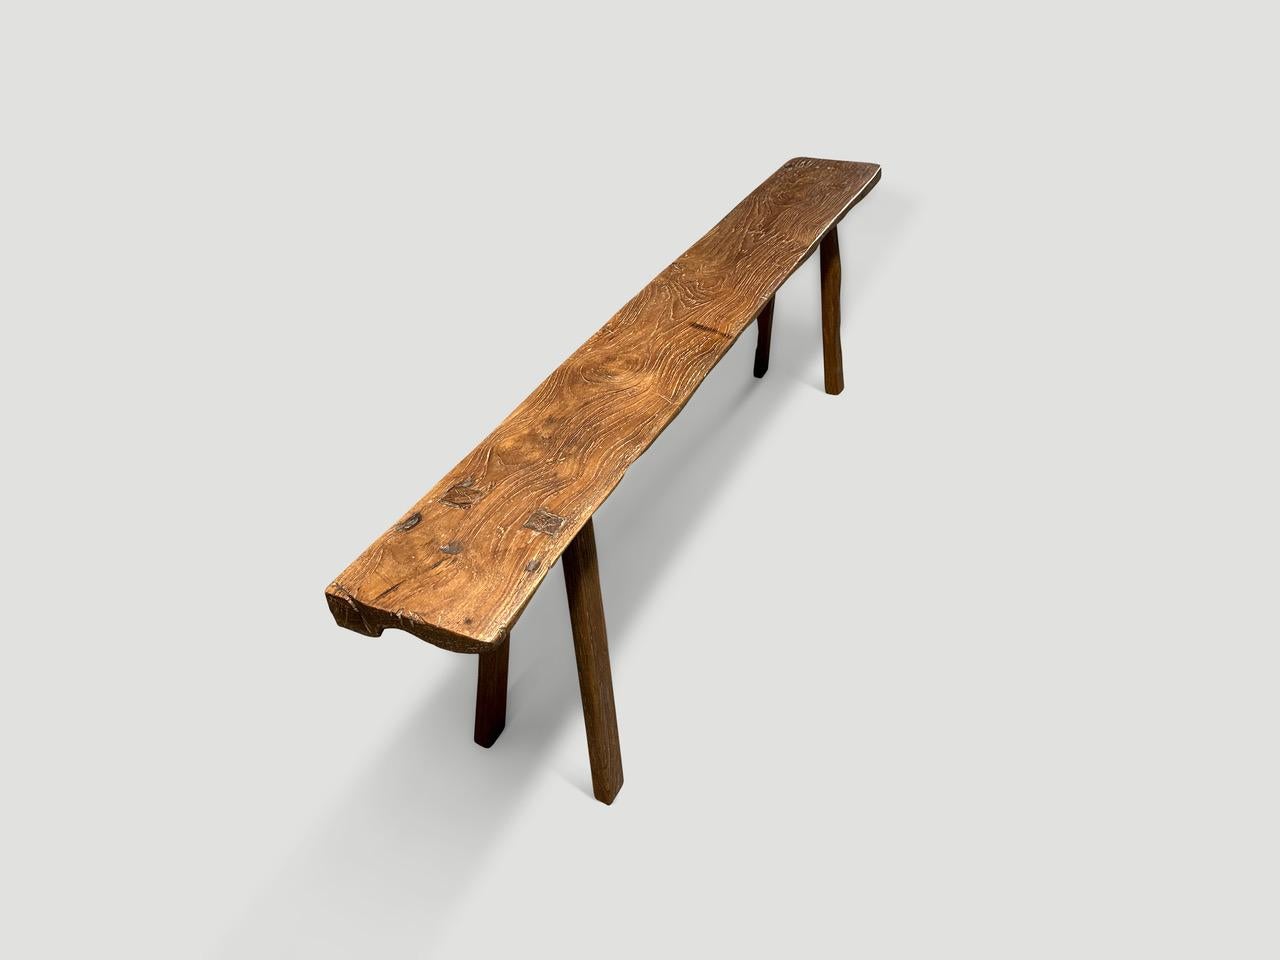 Andrianna Shamaris Antique Teak Wood Wabi Sabi Bench  In Excellent Condition For Sale In New York, NY